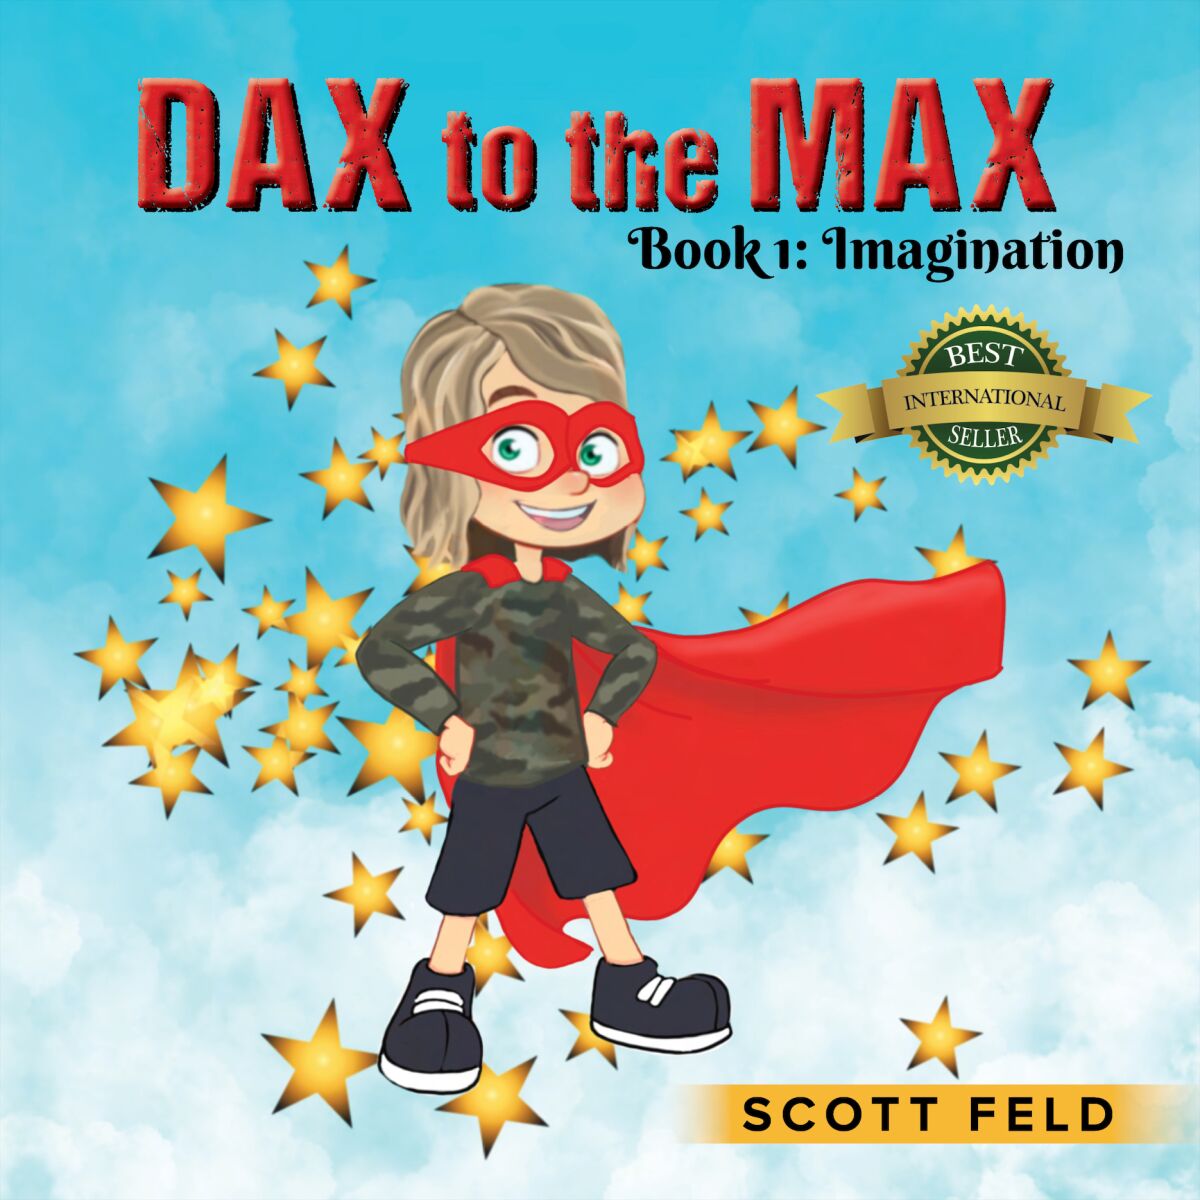 Dax to the Max book cover. The book is an international bestseller for 3-7 year olds.